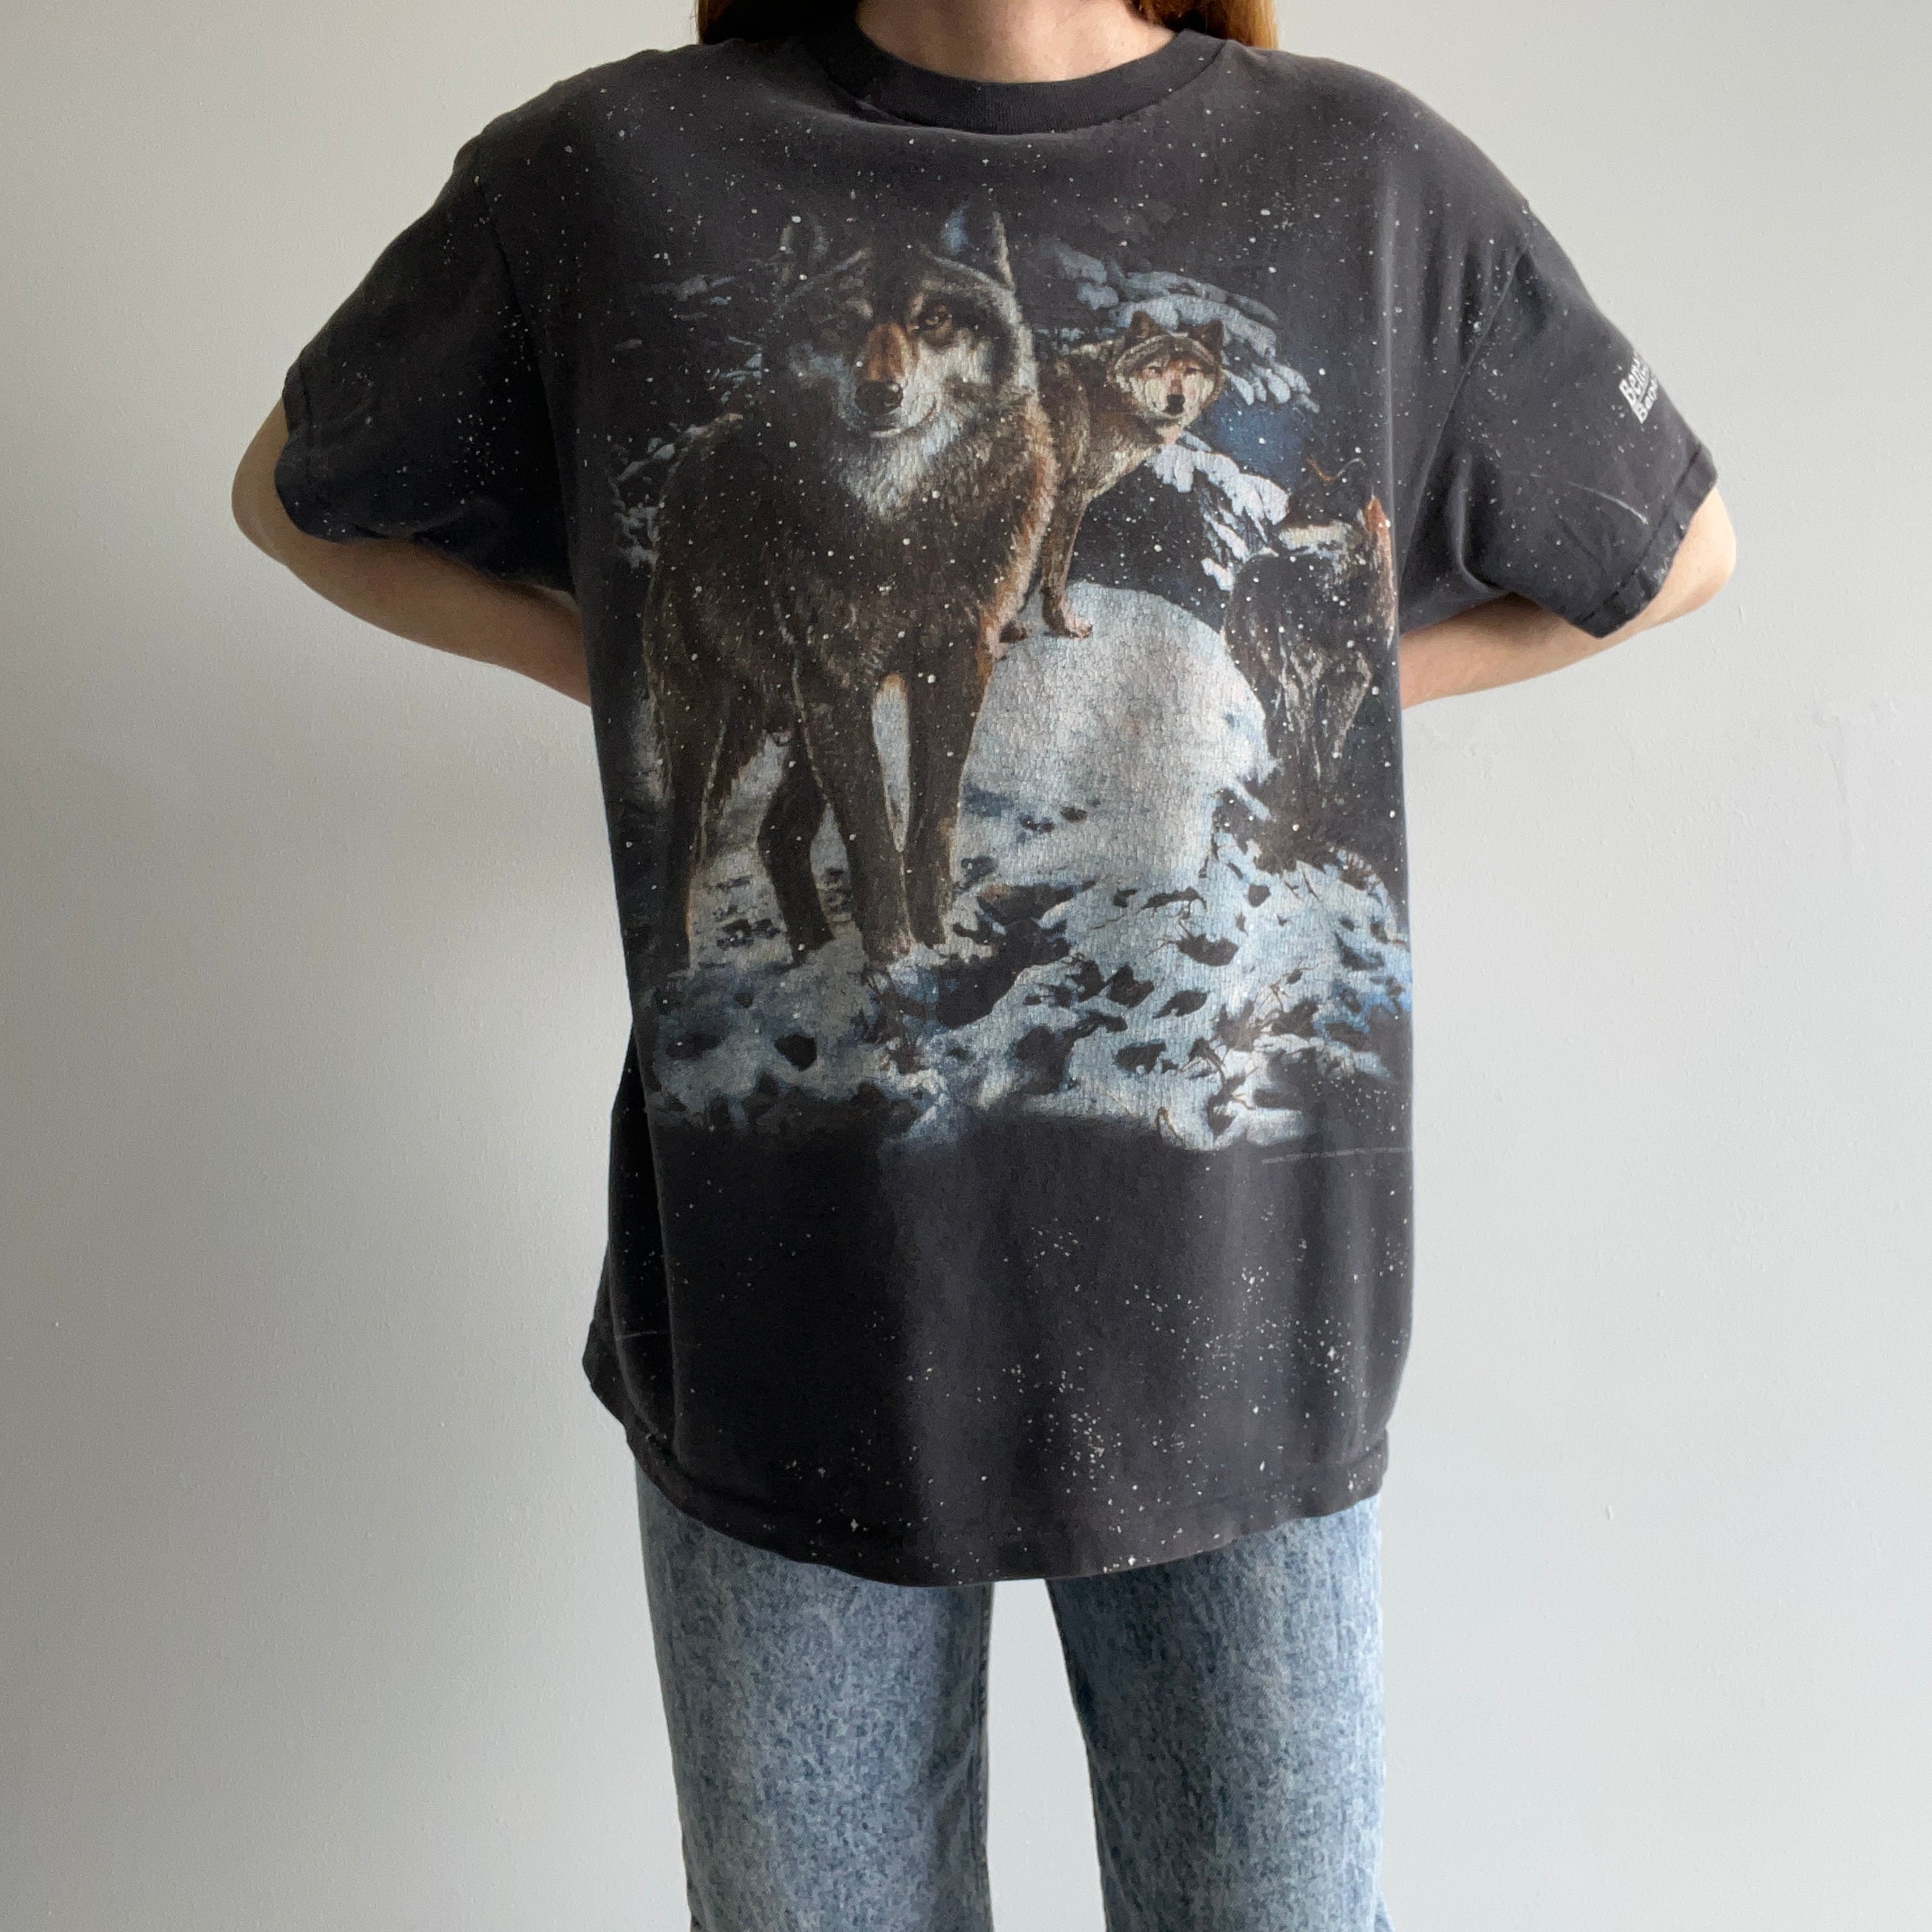 1994 Wolves in the Snow T-Shirt from the Benezett Store in PA